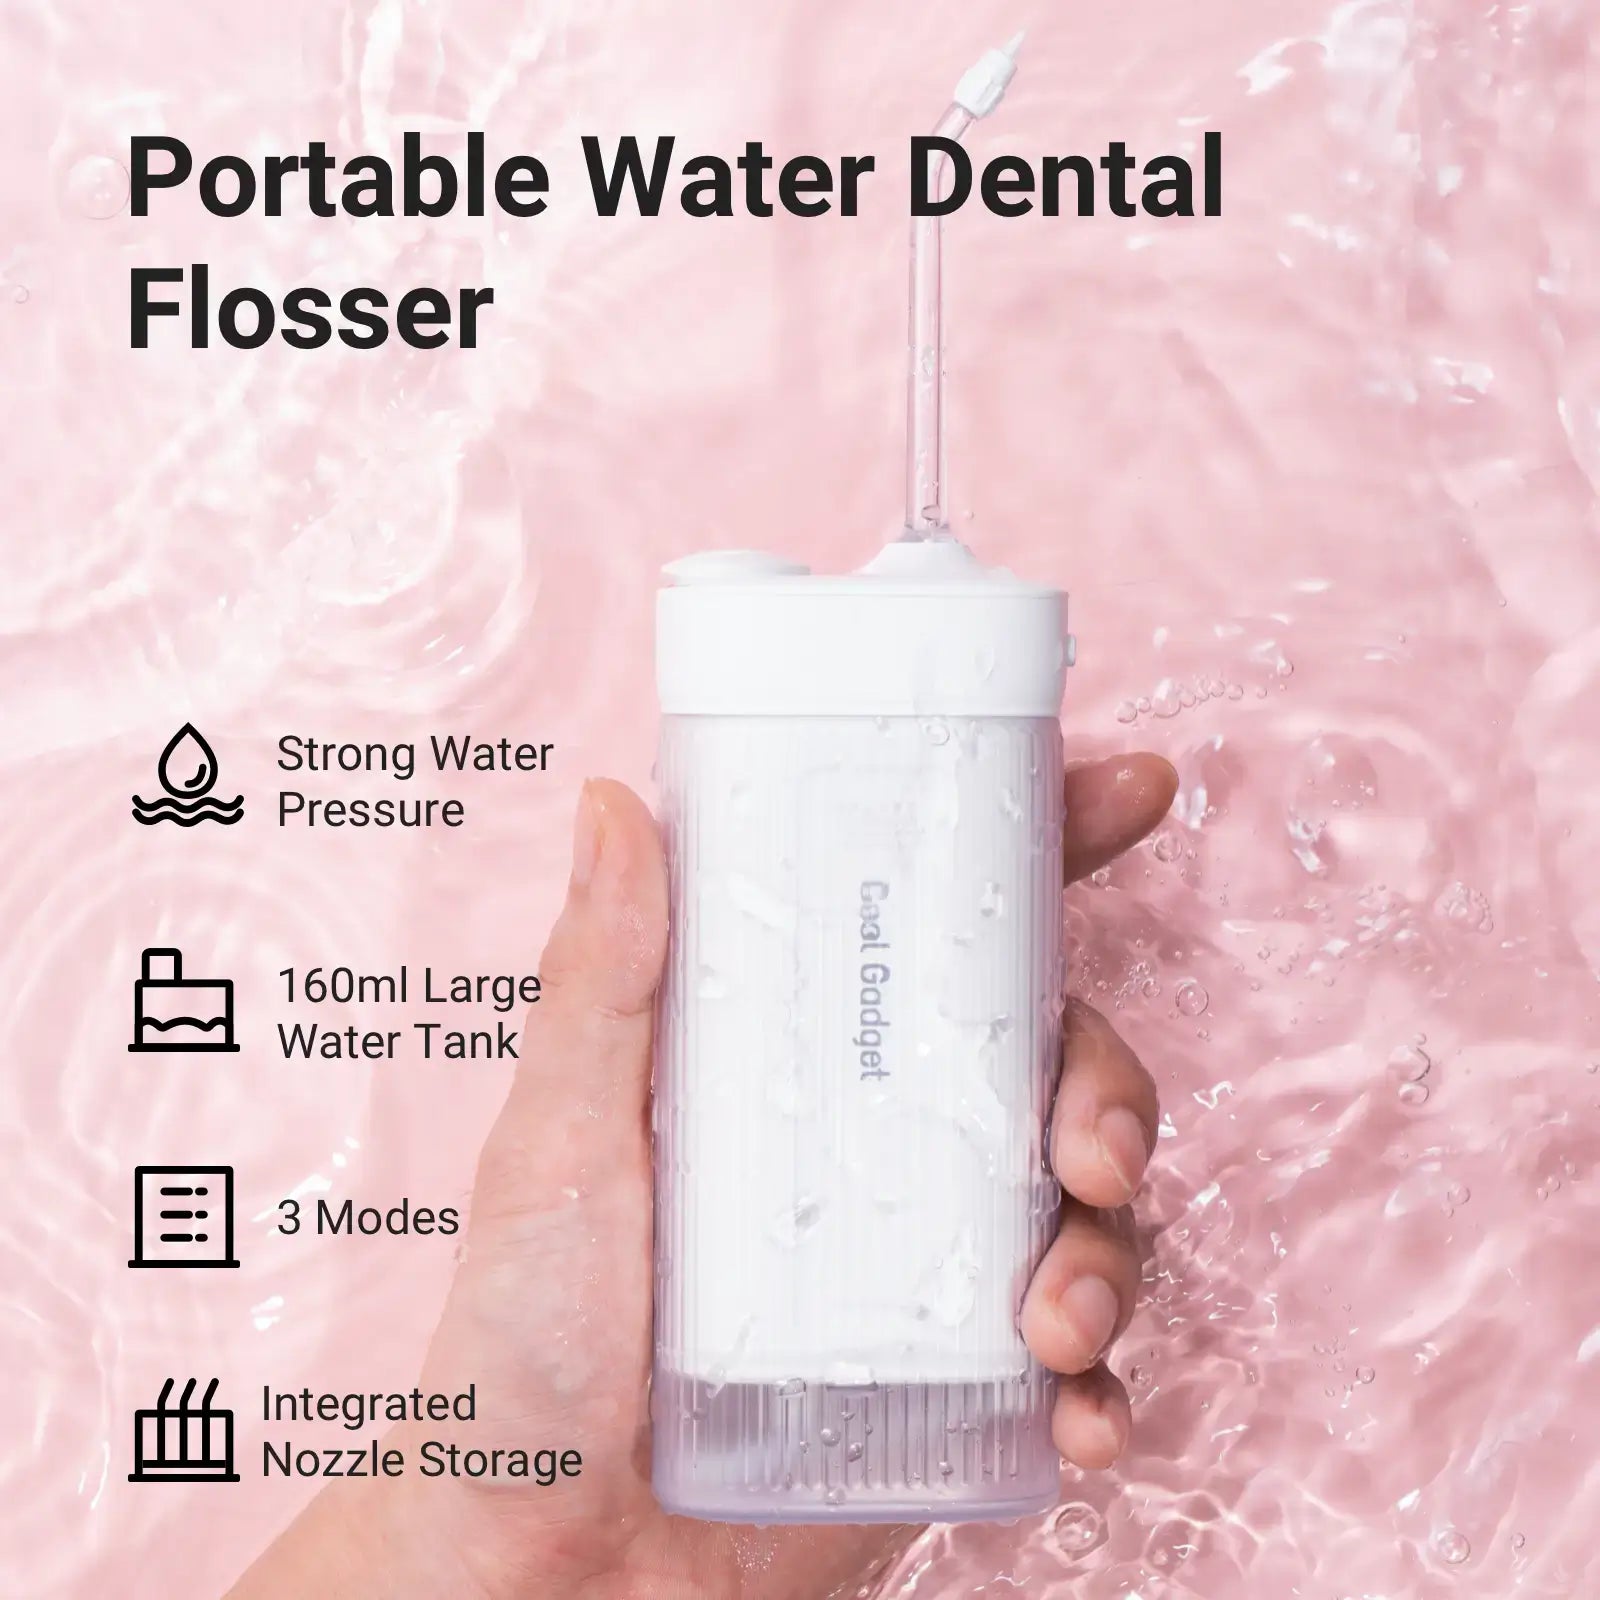 Portable Water Dental Flosser - Strong Water Pressure- 3 Modes- 160ml Large Water Tank- Integrated Nozzle Storage